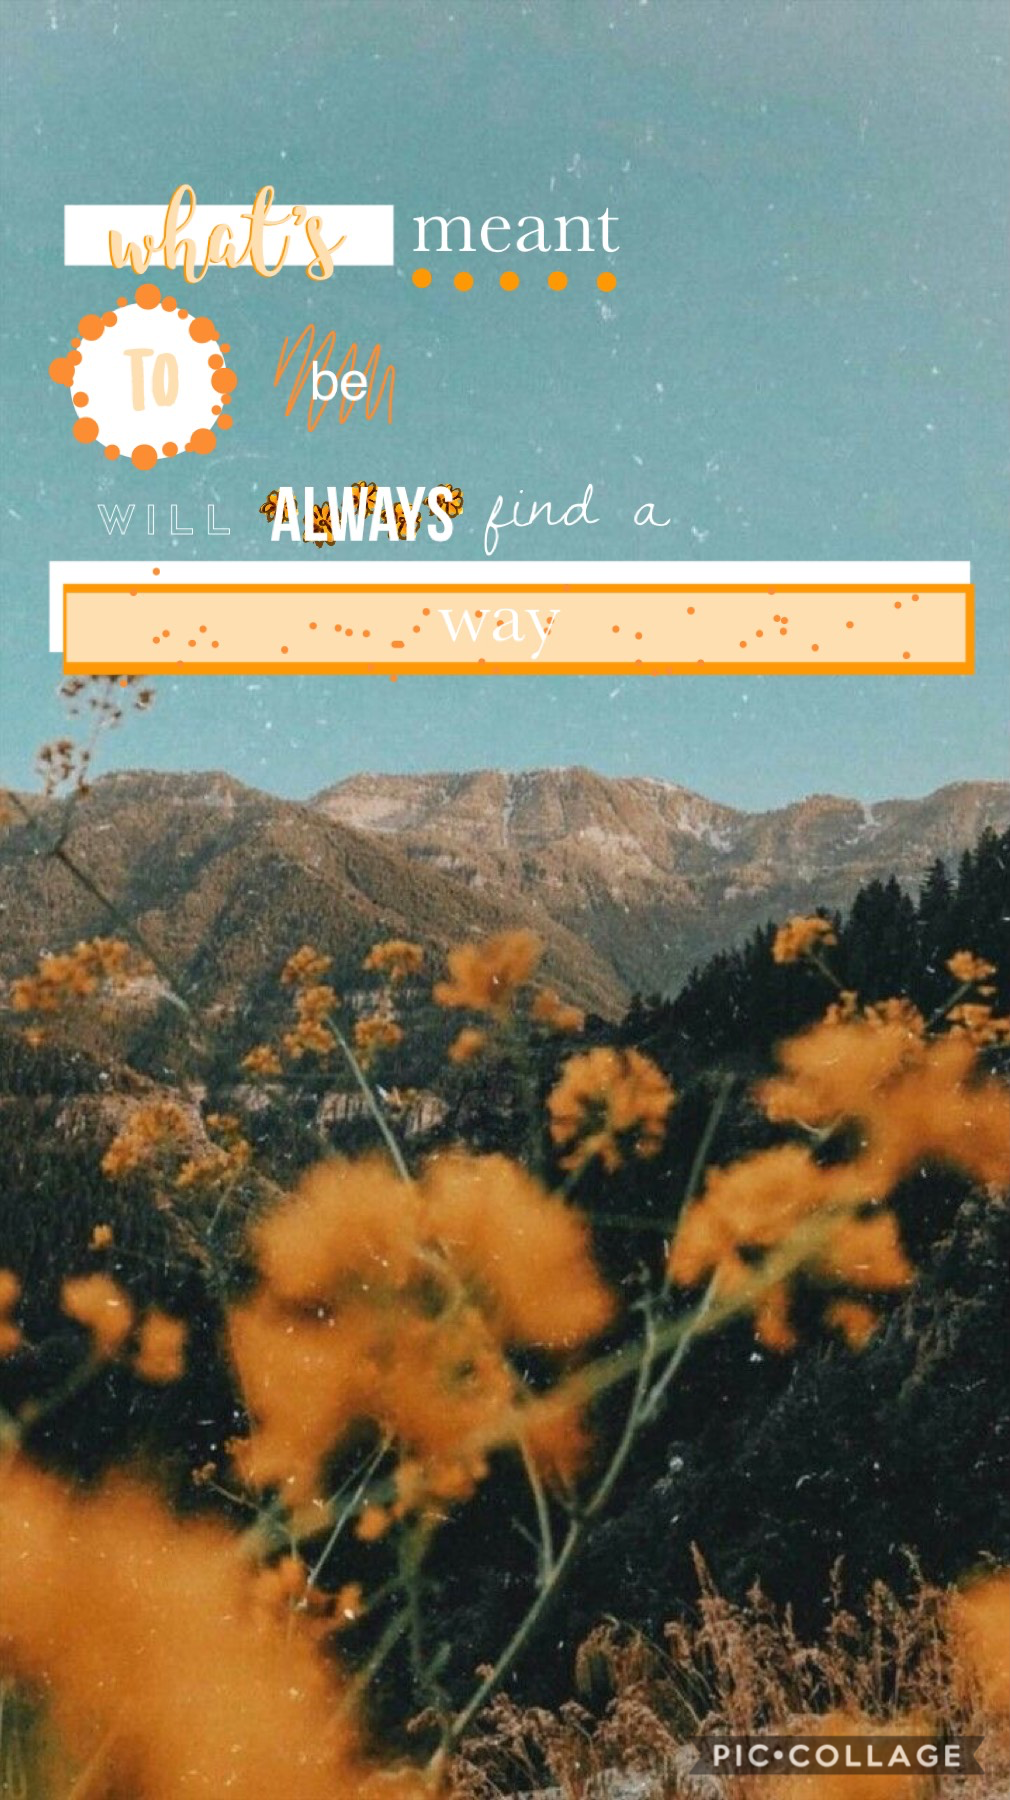 🧡tap🧡
okay... so long time no see... I started this, ended up not liking it very much, but oh well. Didn’t realize how much I missed PicCollage, so hopefully I will start posting again 🤞🏻💕